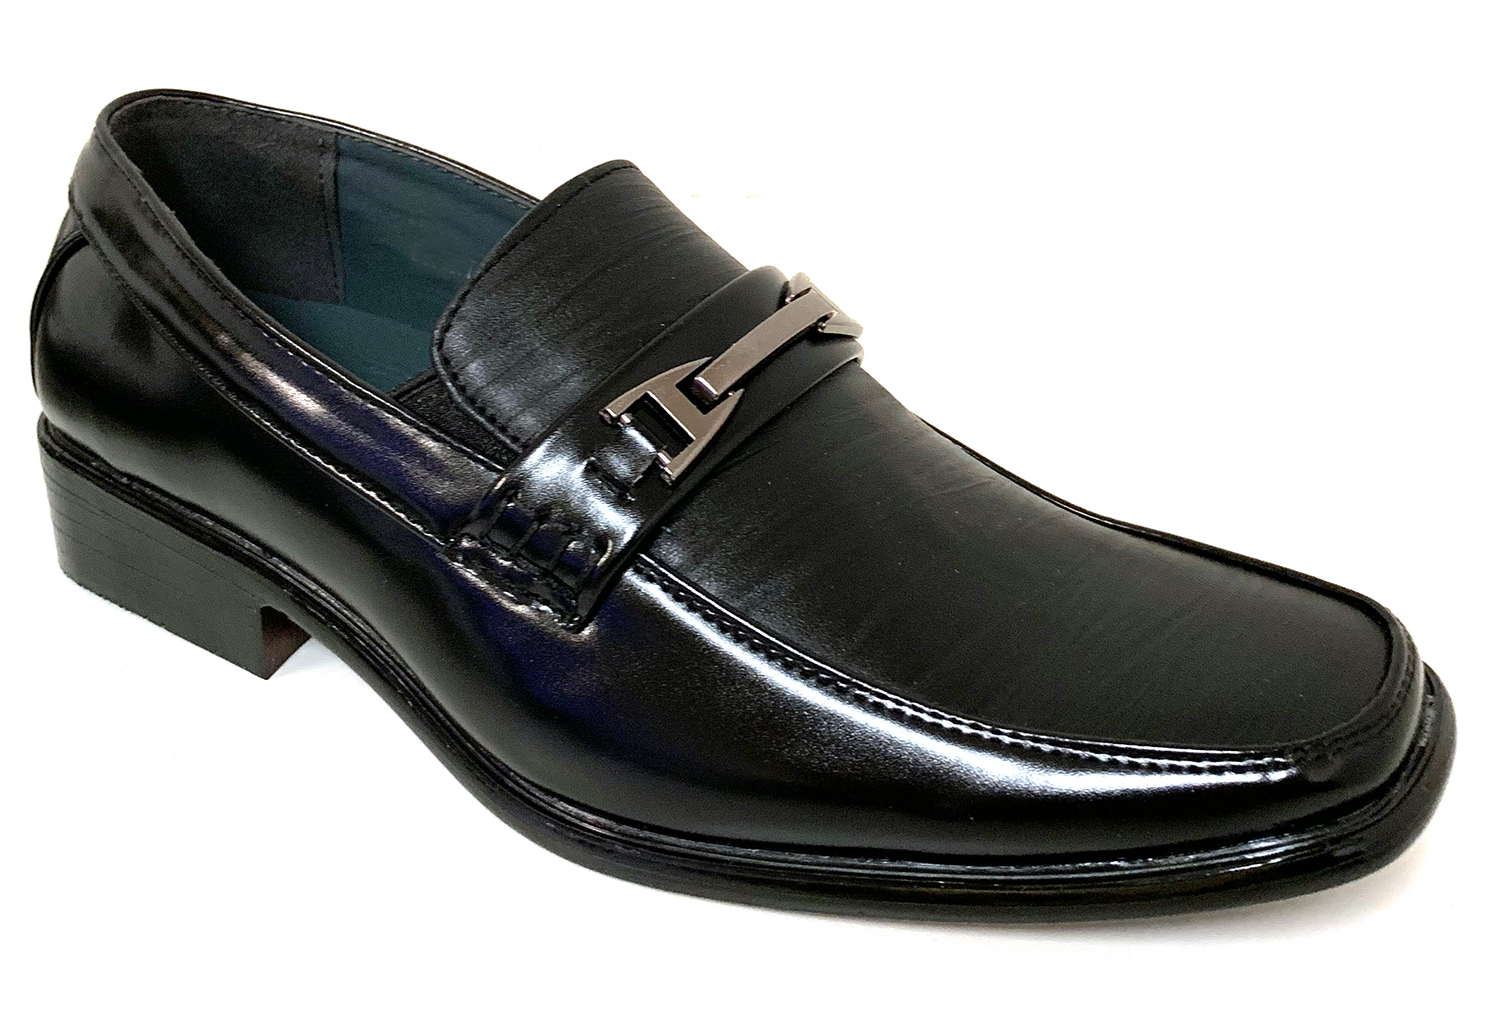 Men's Dress Shoes Dual Elastic Fashion Slip On Buckle Formal Casual Loafers - image 1 of 4